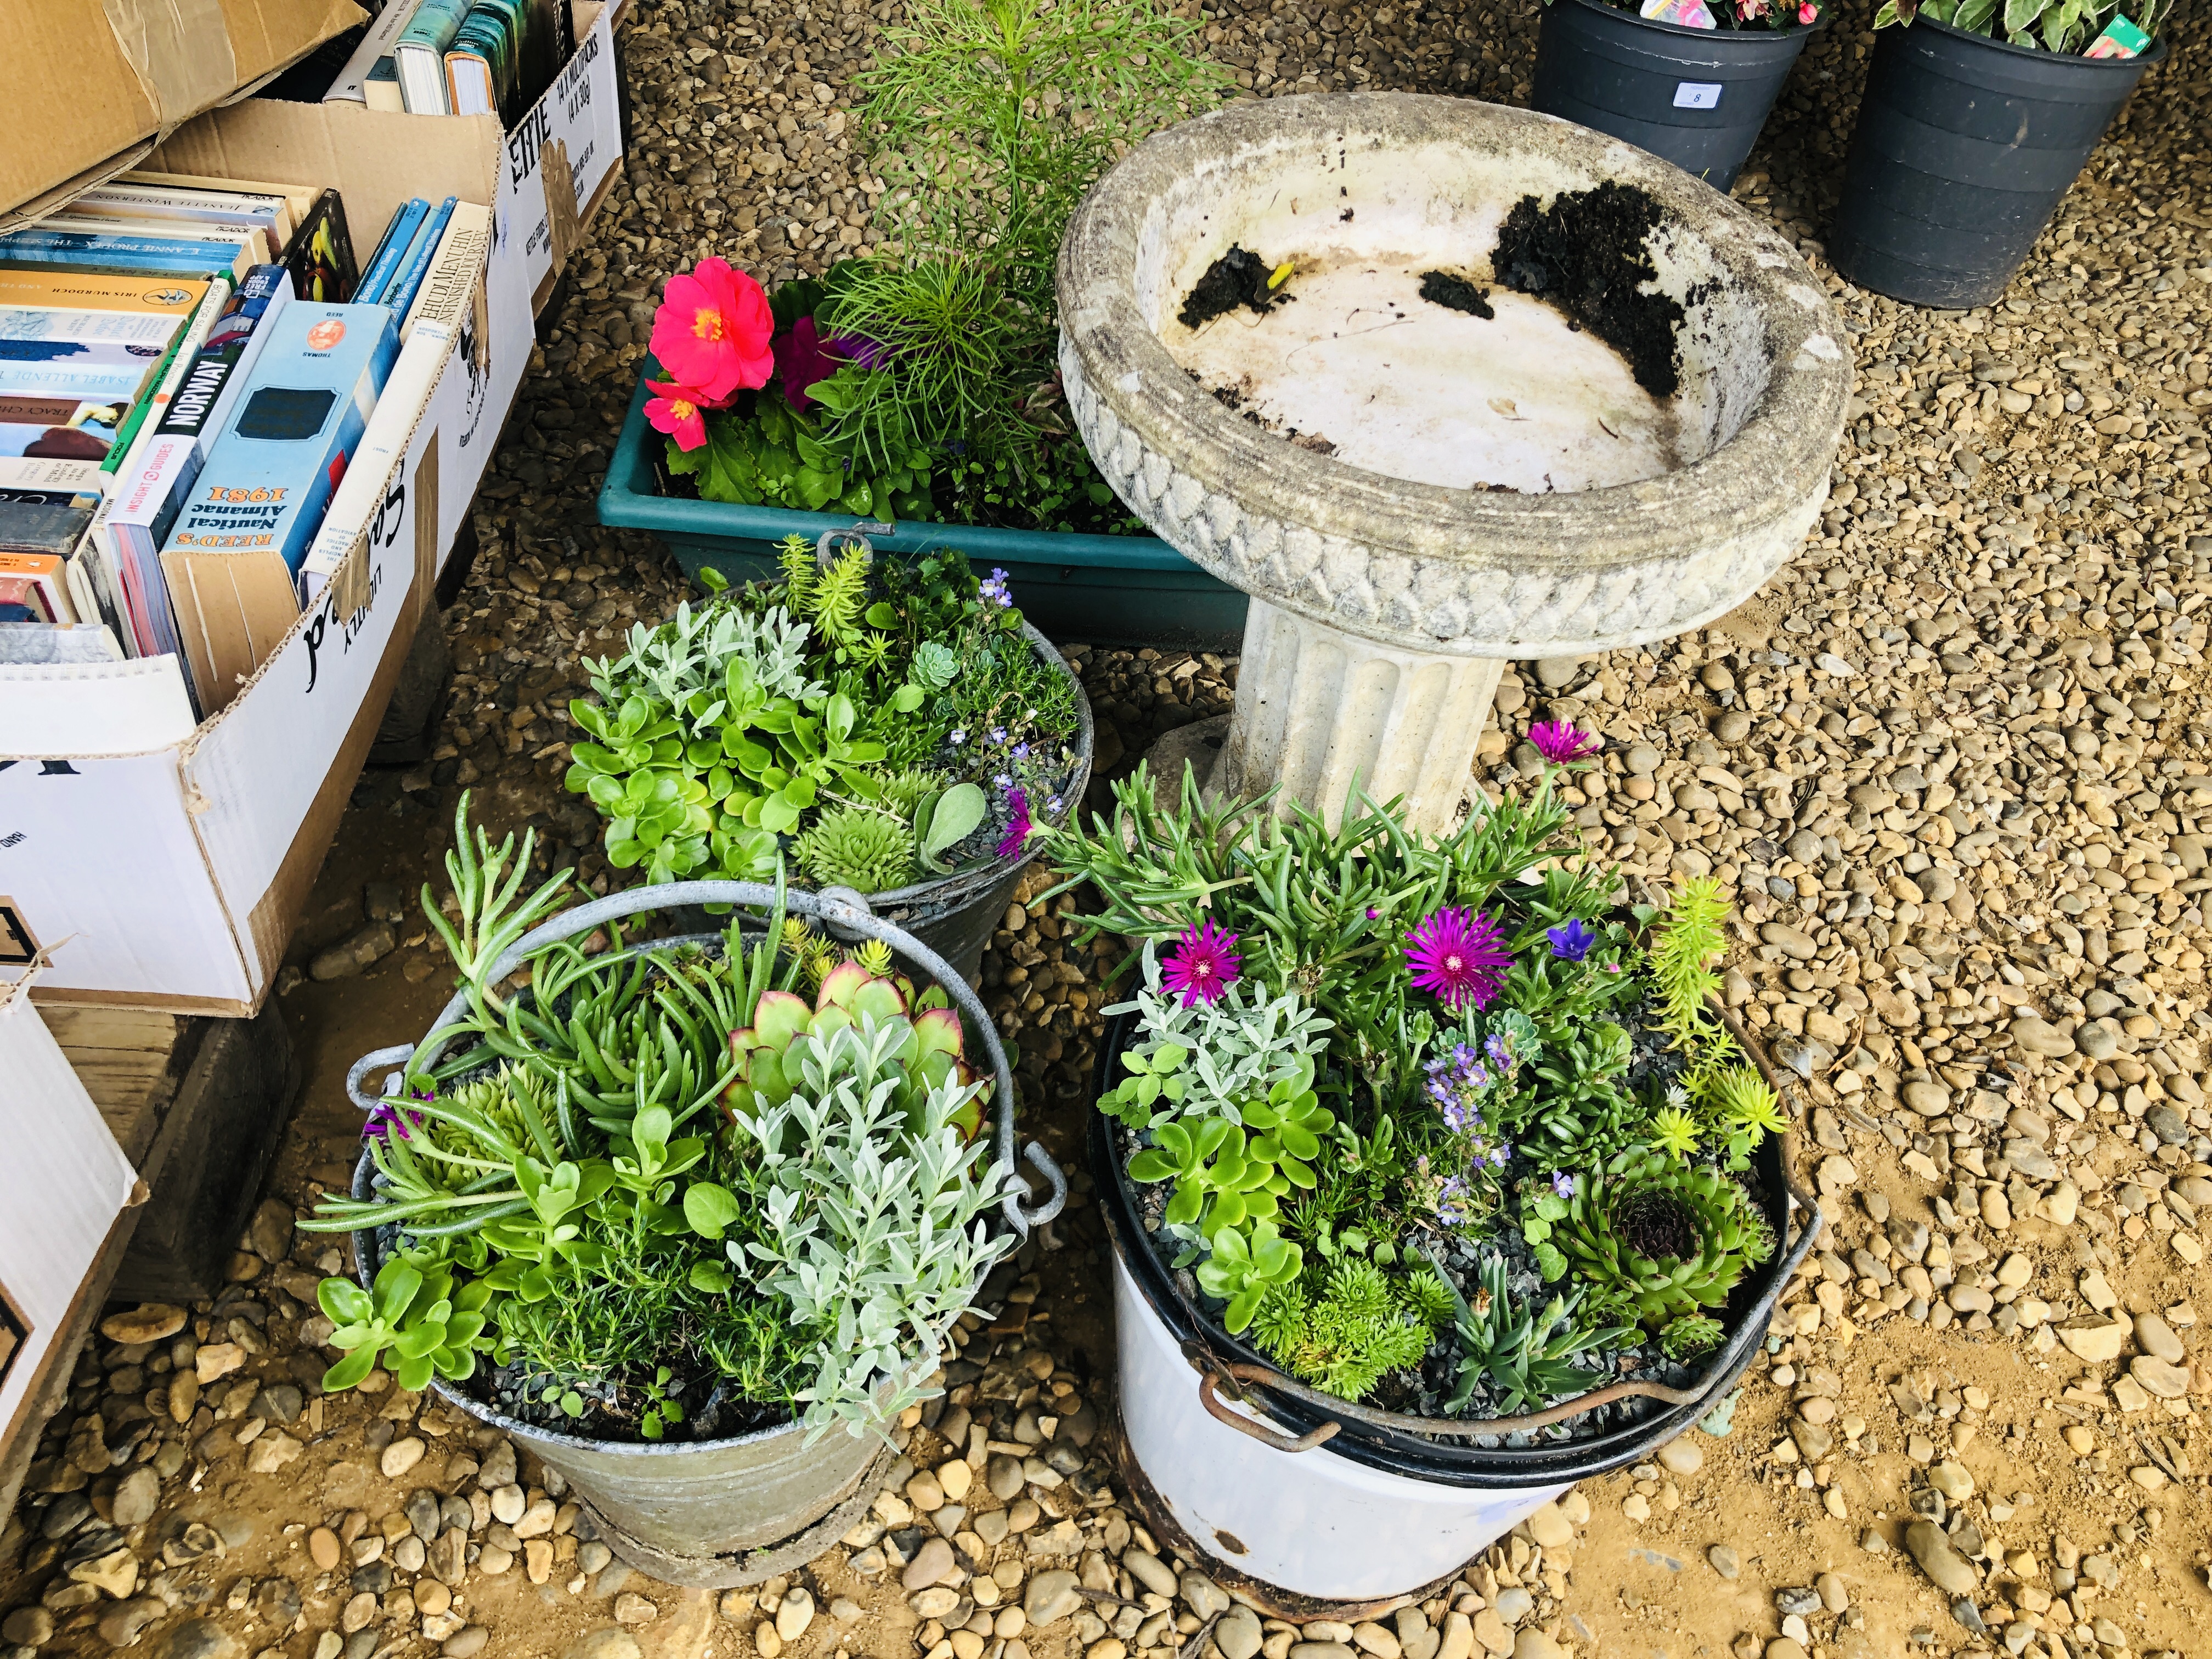 THREE VINTAGE BUCKETS CONTAINING ROCKERY AND ALPINE PLANTS ALONG WITH PLASTIC TROUGH PLANTER WITH